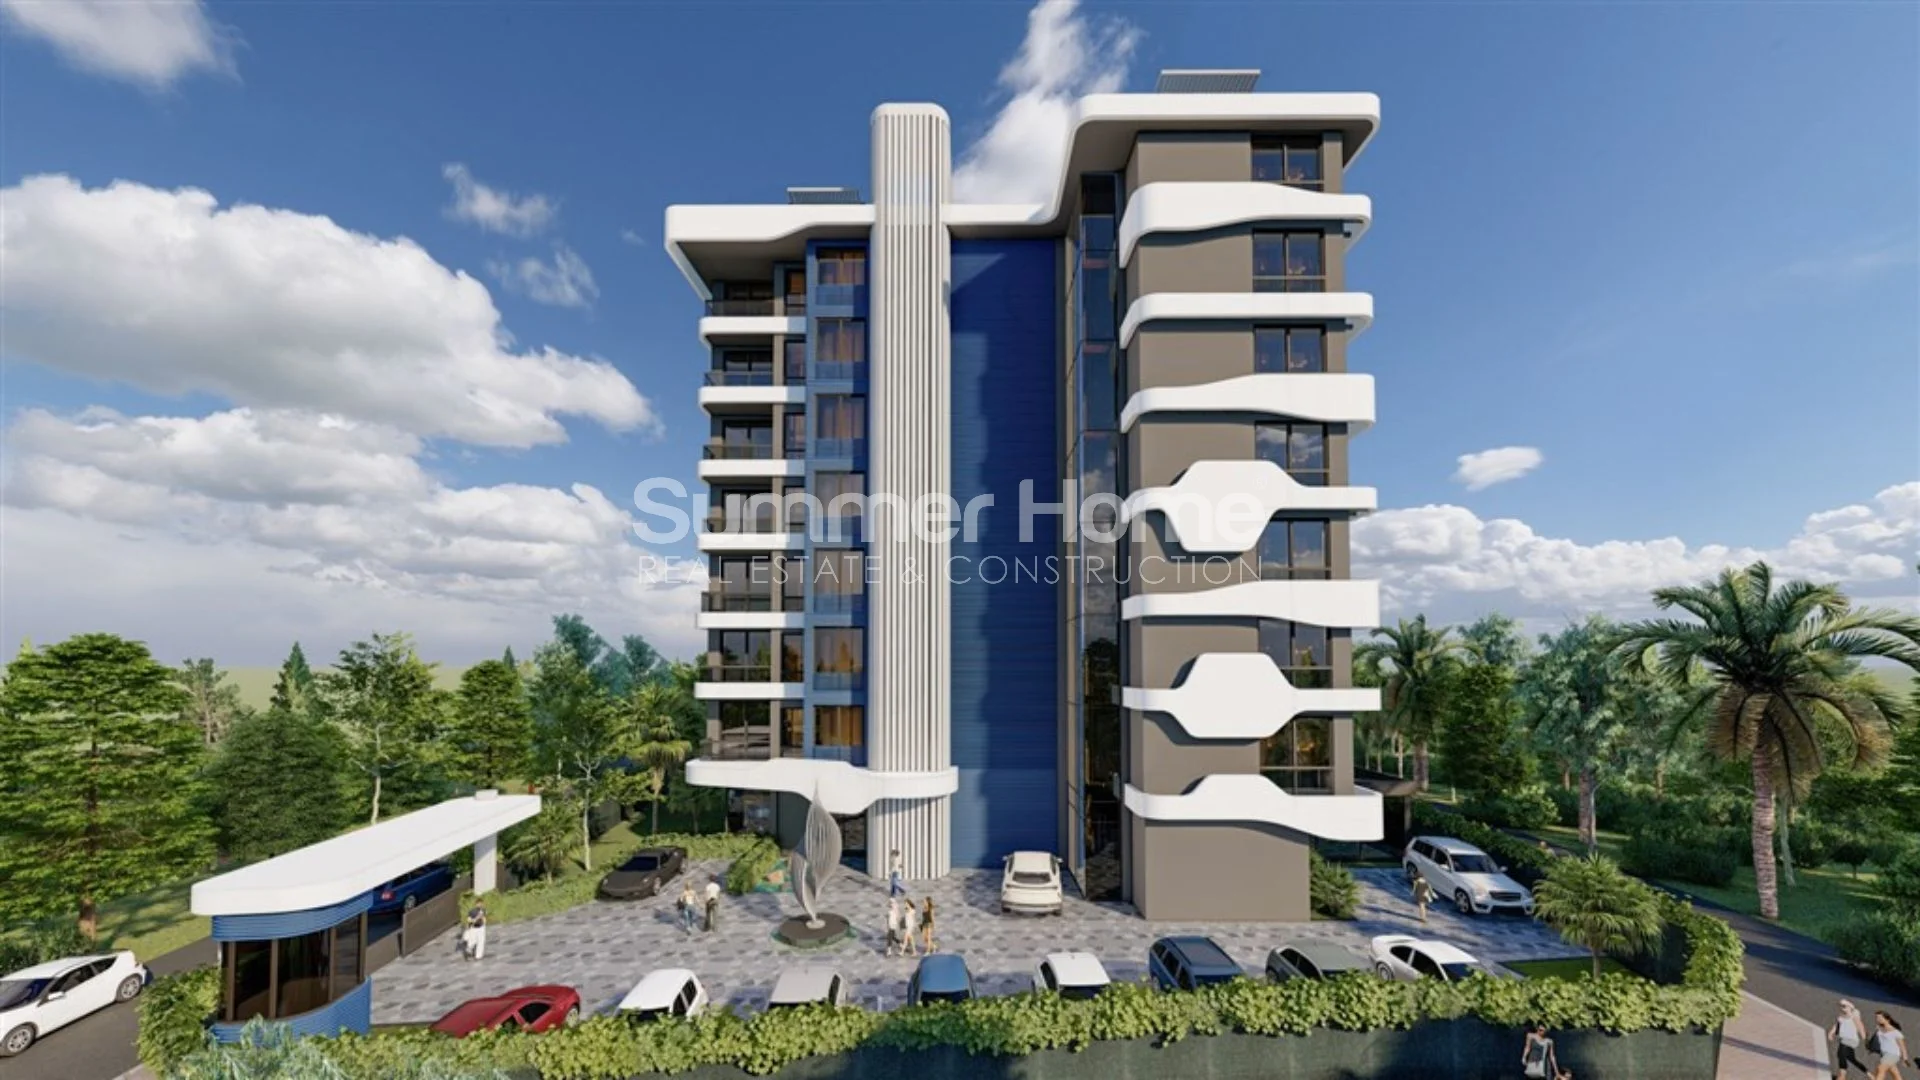 Apartments with Stunning Views in Avsallar General - 3